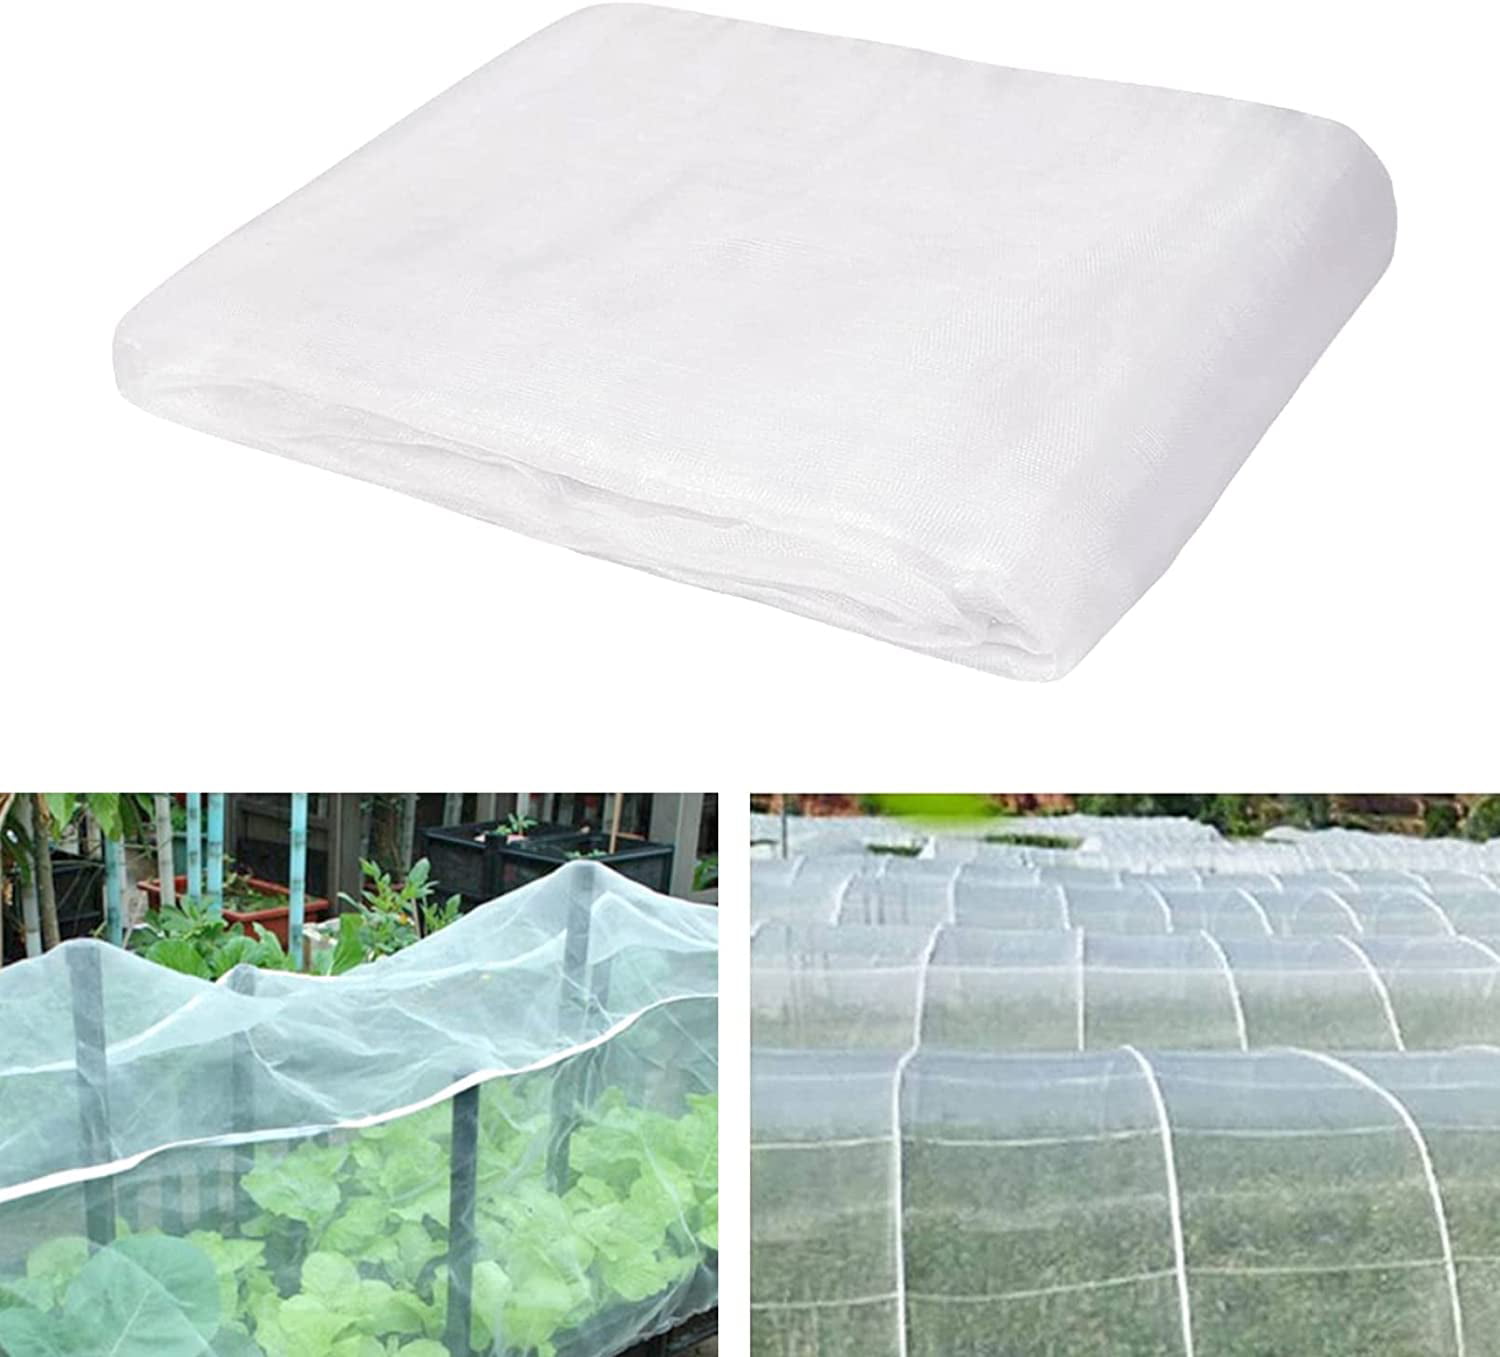 Birds Mesh Net is Easy to Use,Lasting Protection Against Birds KUD Shade Heavy Duty Anti Bird Netting for Garden,Protect Plants and Fruit Trees from Birds and Animals 6.8ft×20ft 